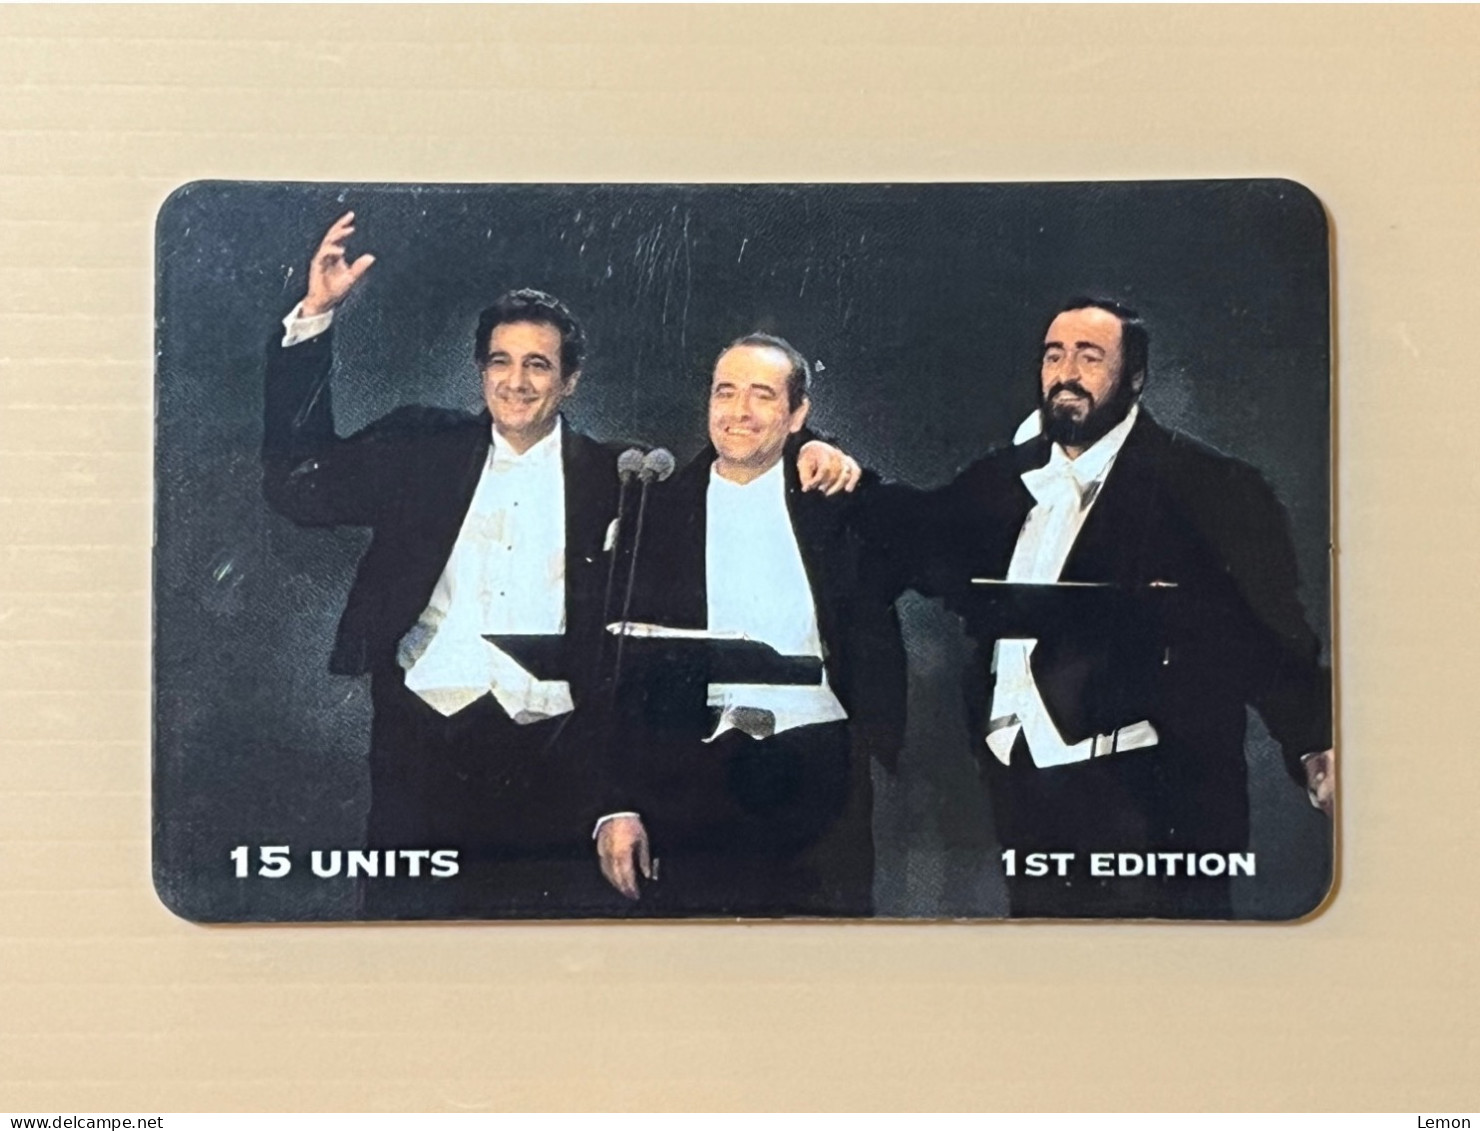 Mint USA UNITED STATES America Prepaid Telecard Phonecard, The 3 Tenors In Concert, Set Of 1 Mint Card - Verzamelingen